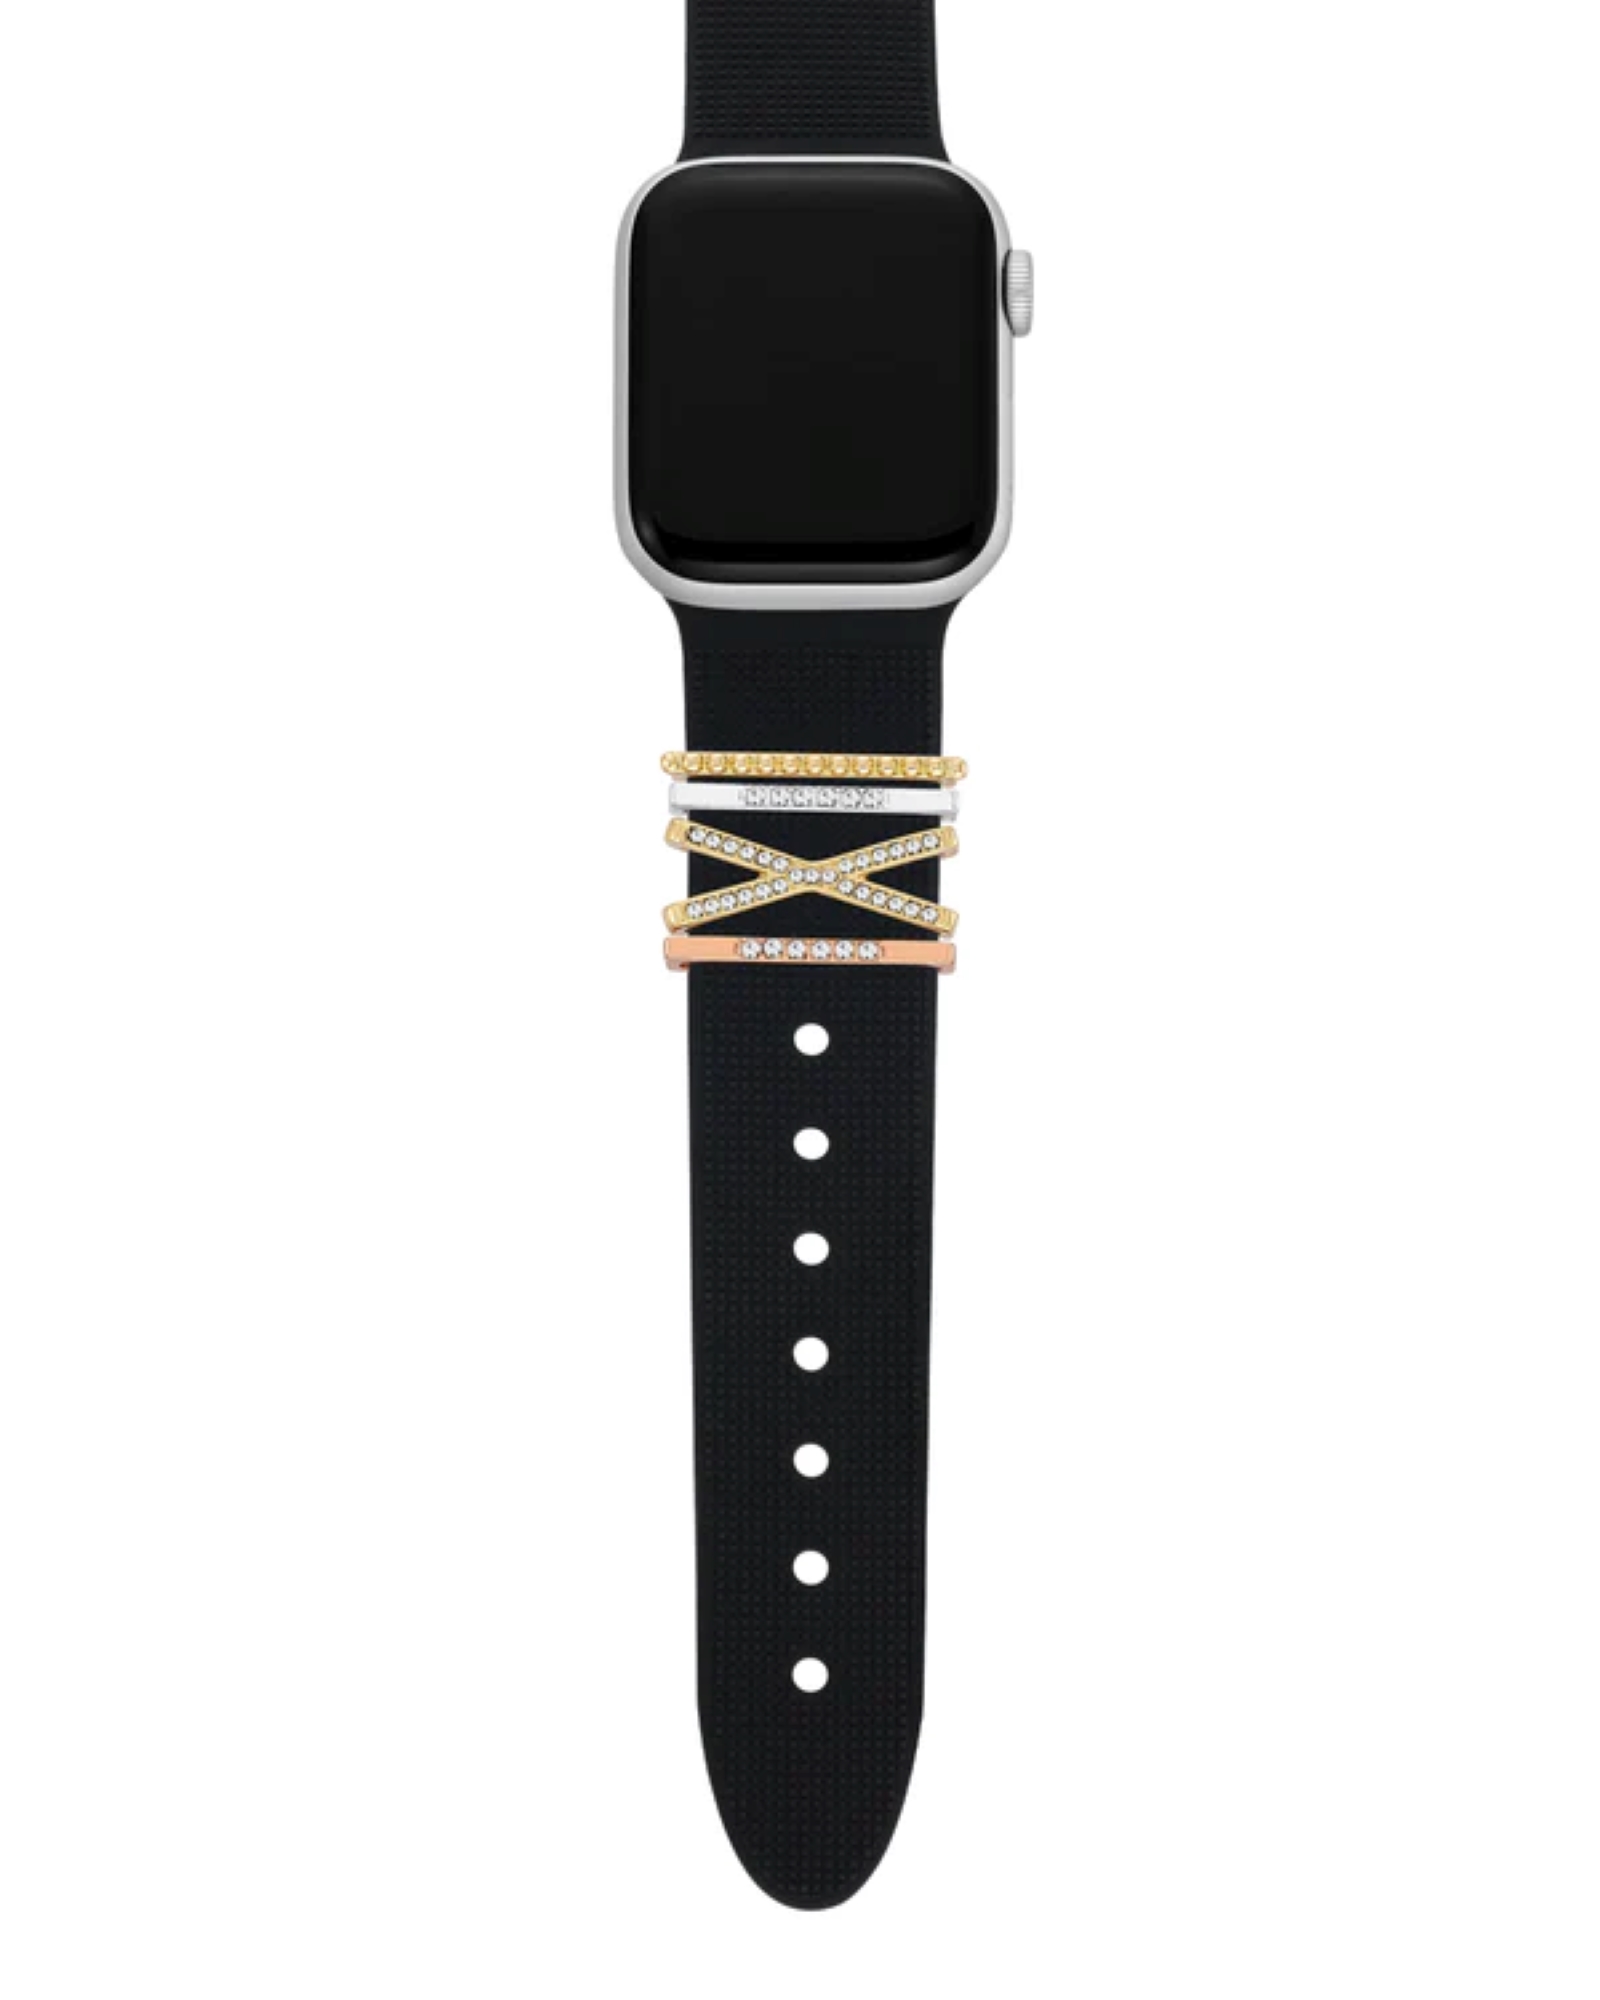 new withit apple watch accessories